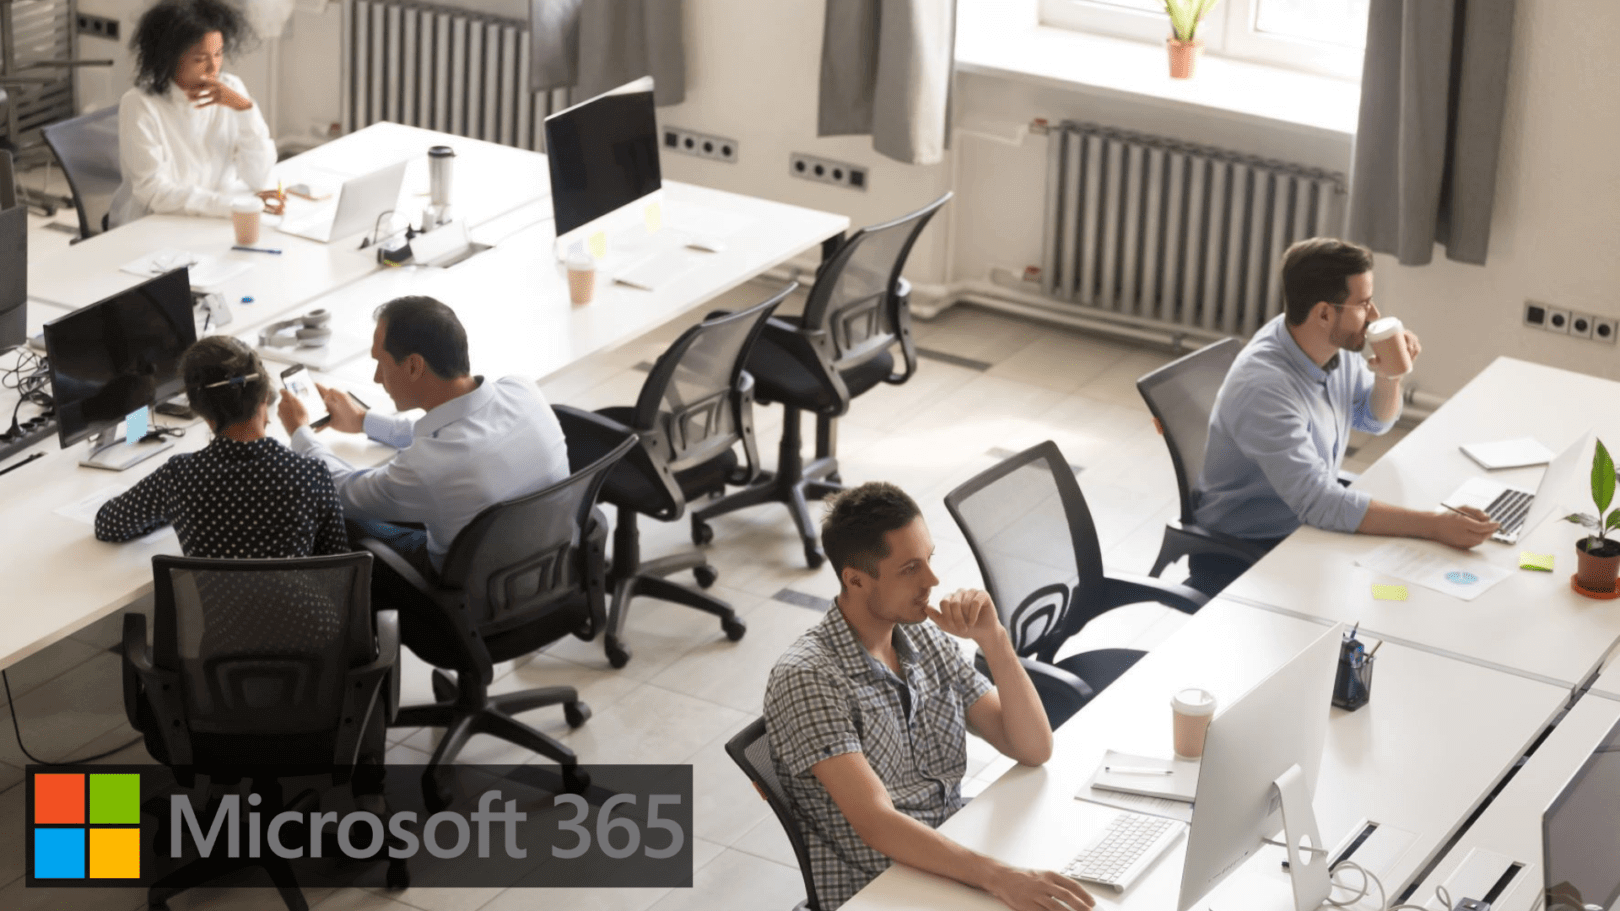 Photo of people working in office with Microsoft 365 logo